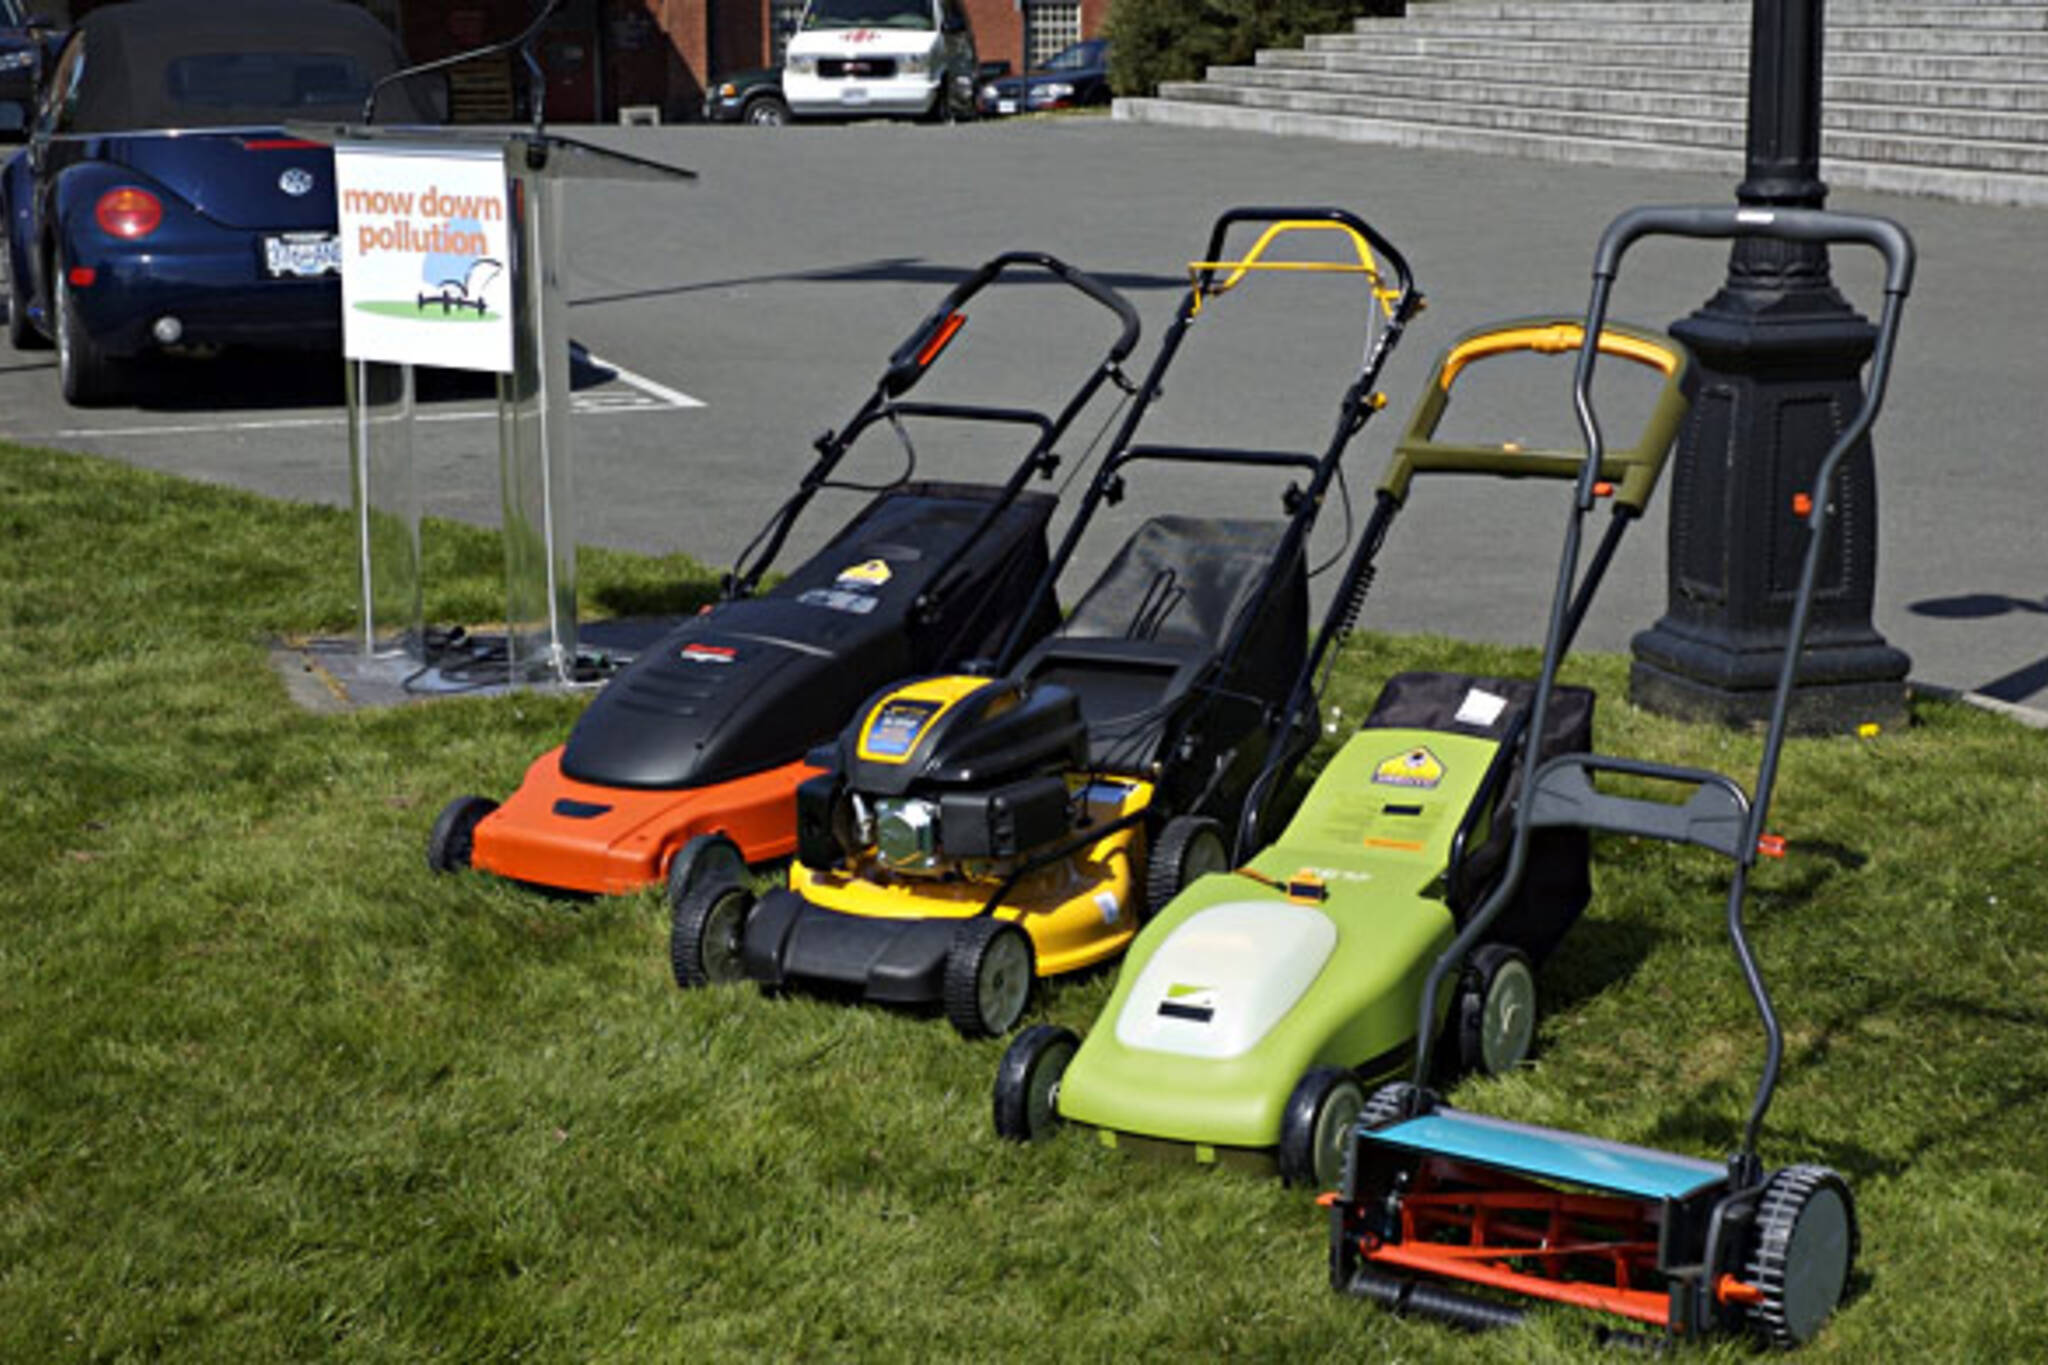 Eco-friendly lawn mowers at Mow Down Pollution event launch